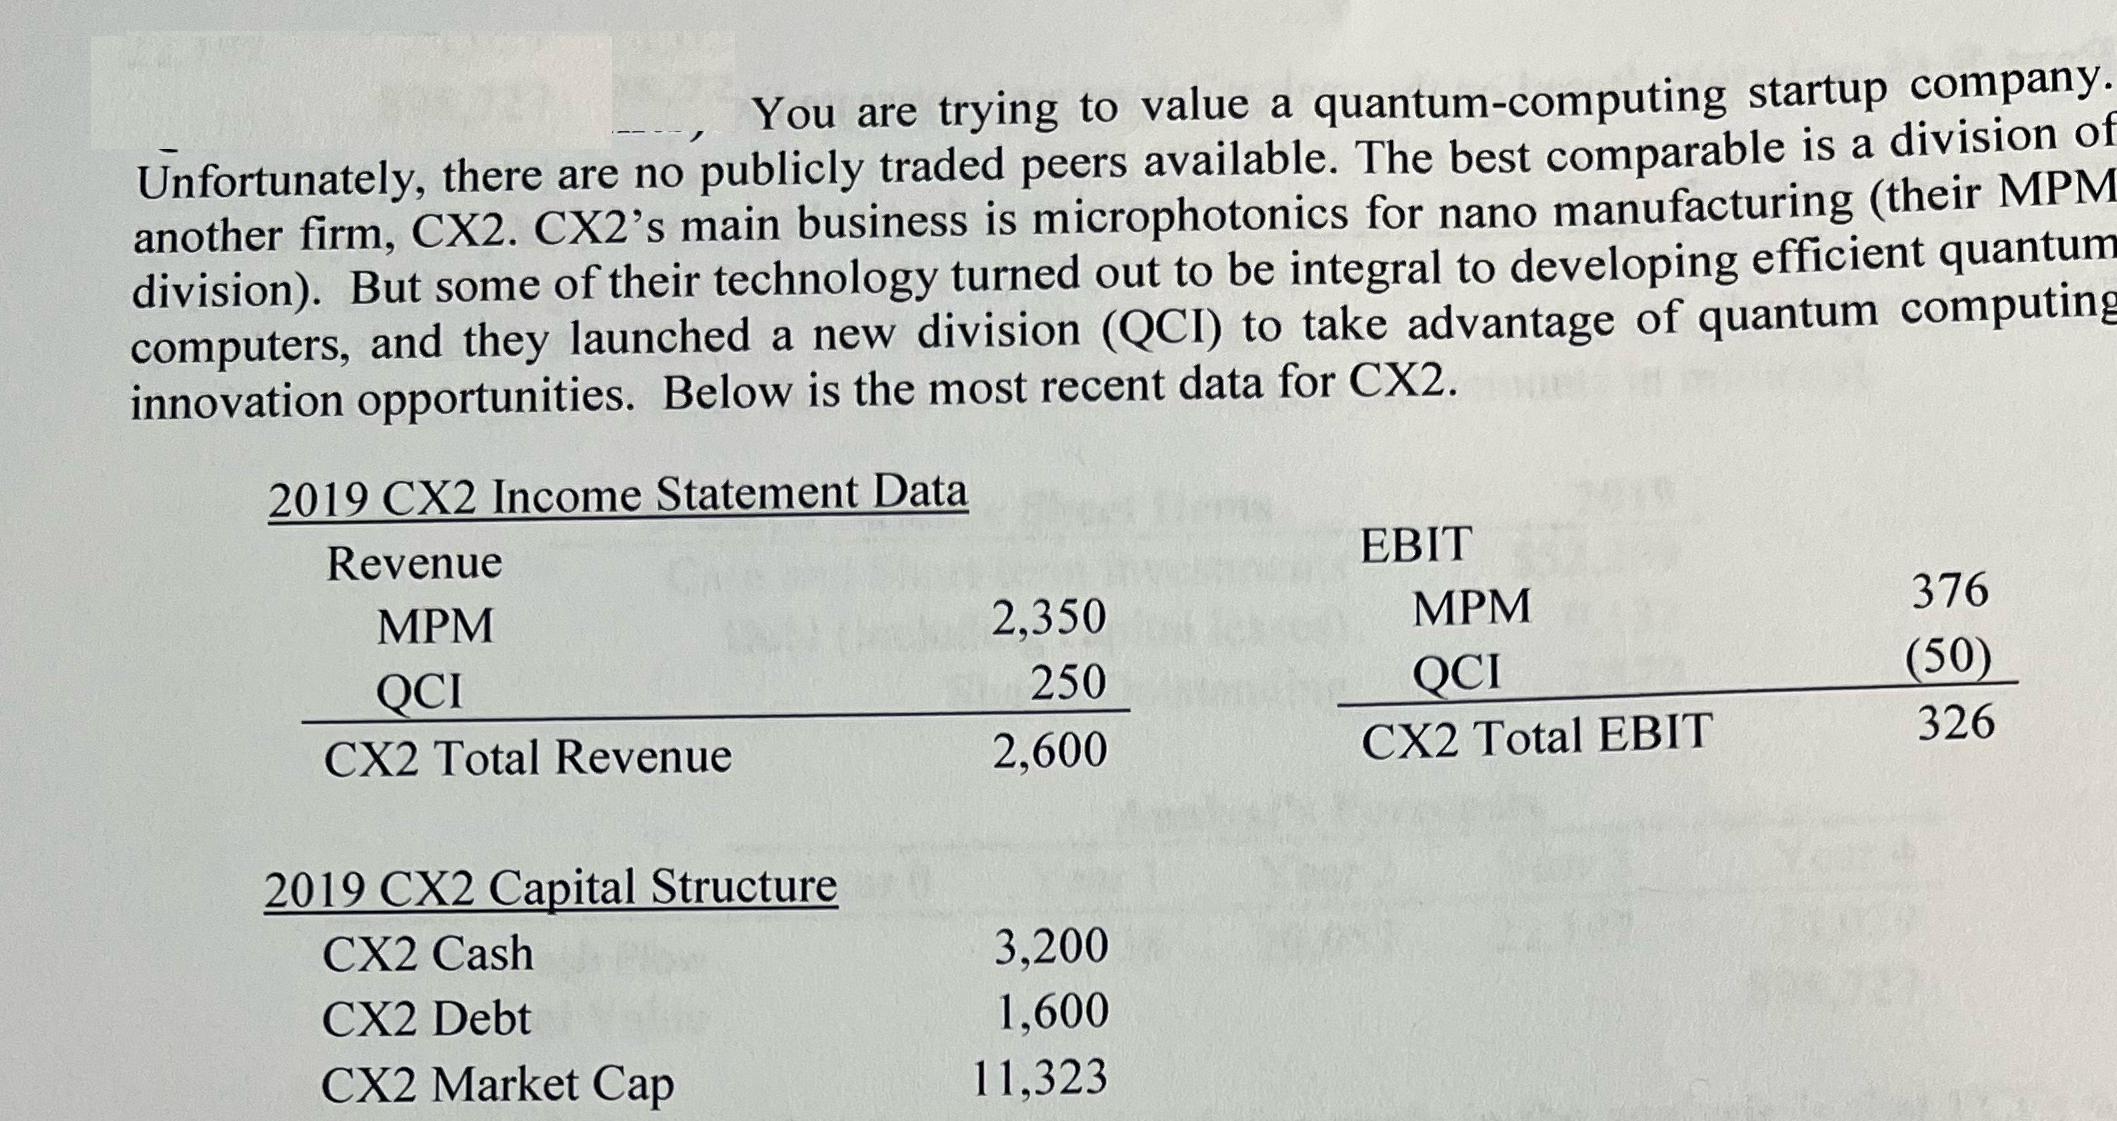 You are trying to value a quantum-computing startup company. Unfortunately, there are no publicly traded